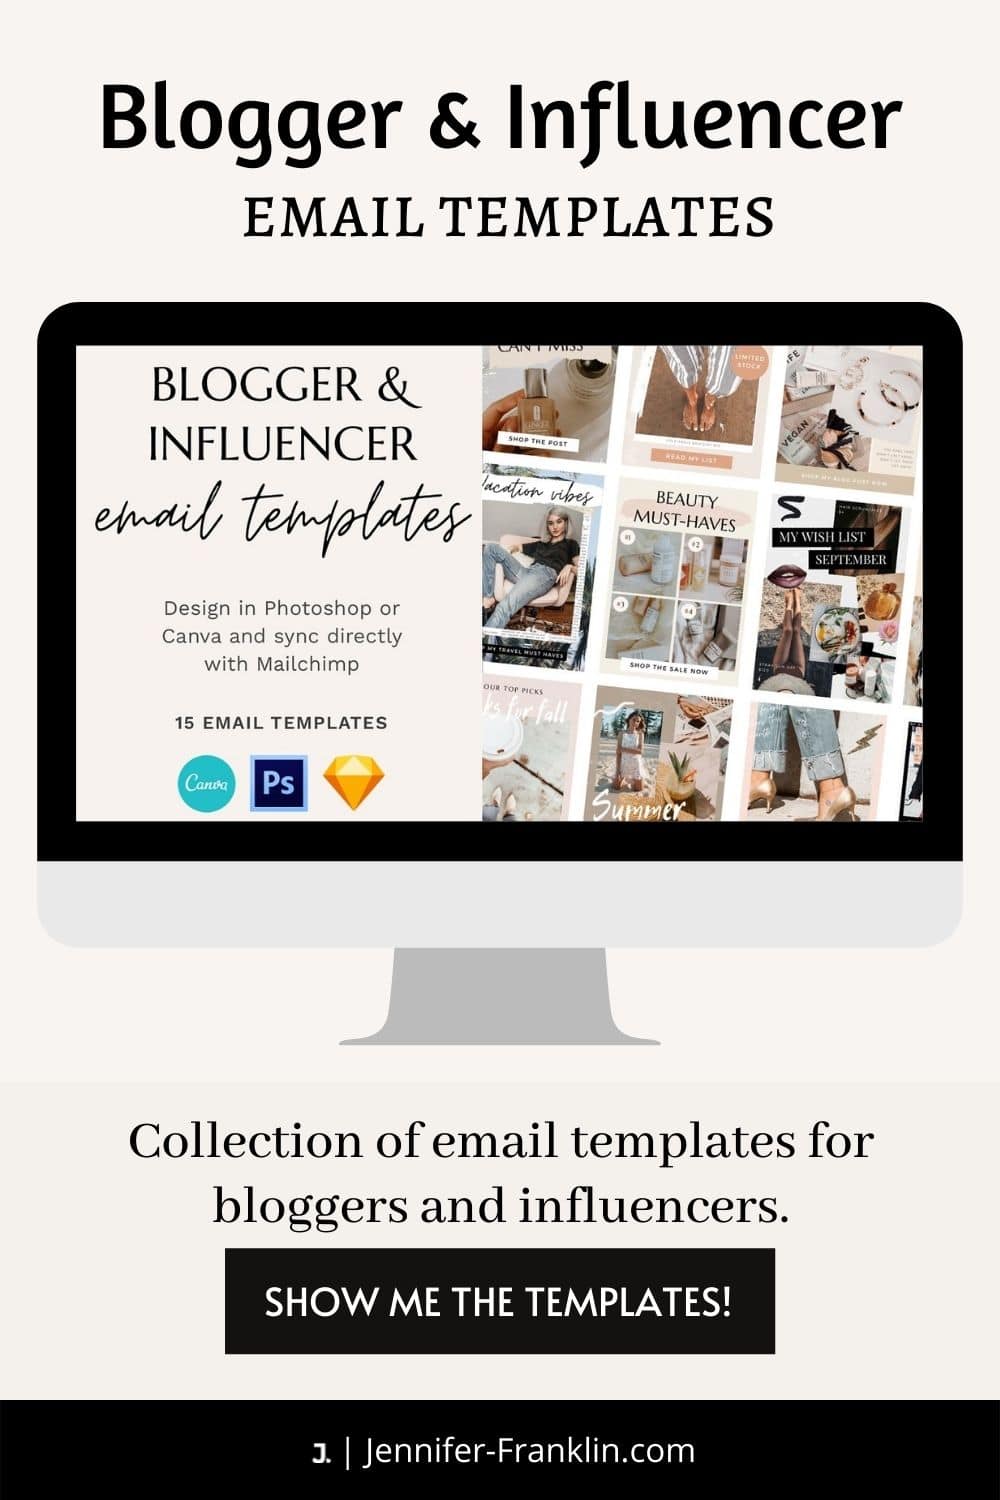 Blogger & Influencer Email Templates